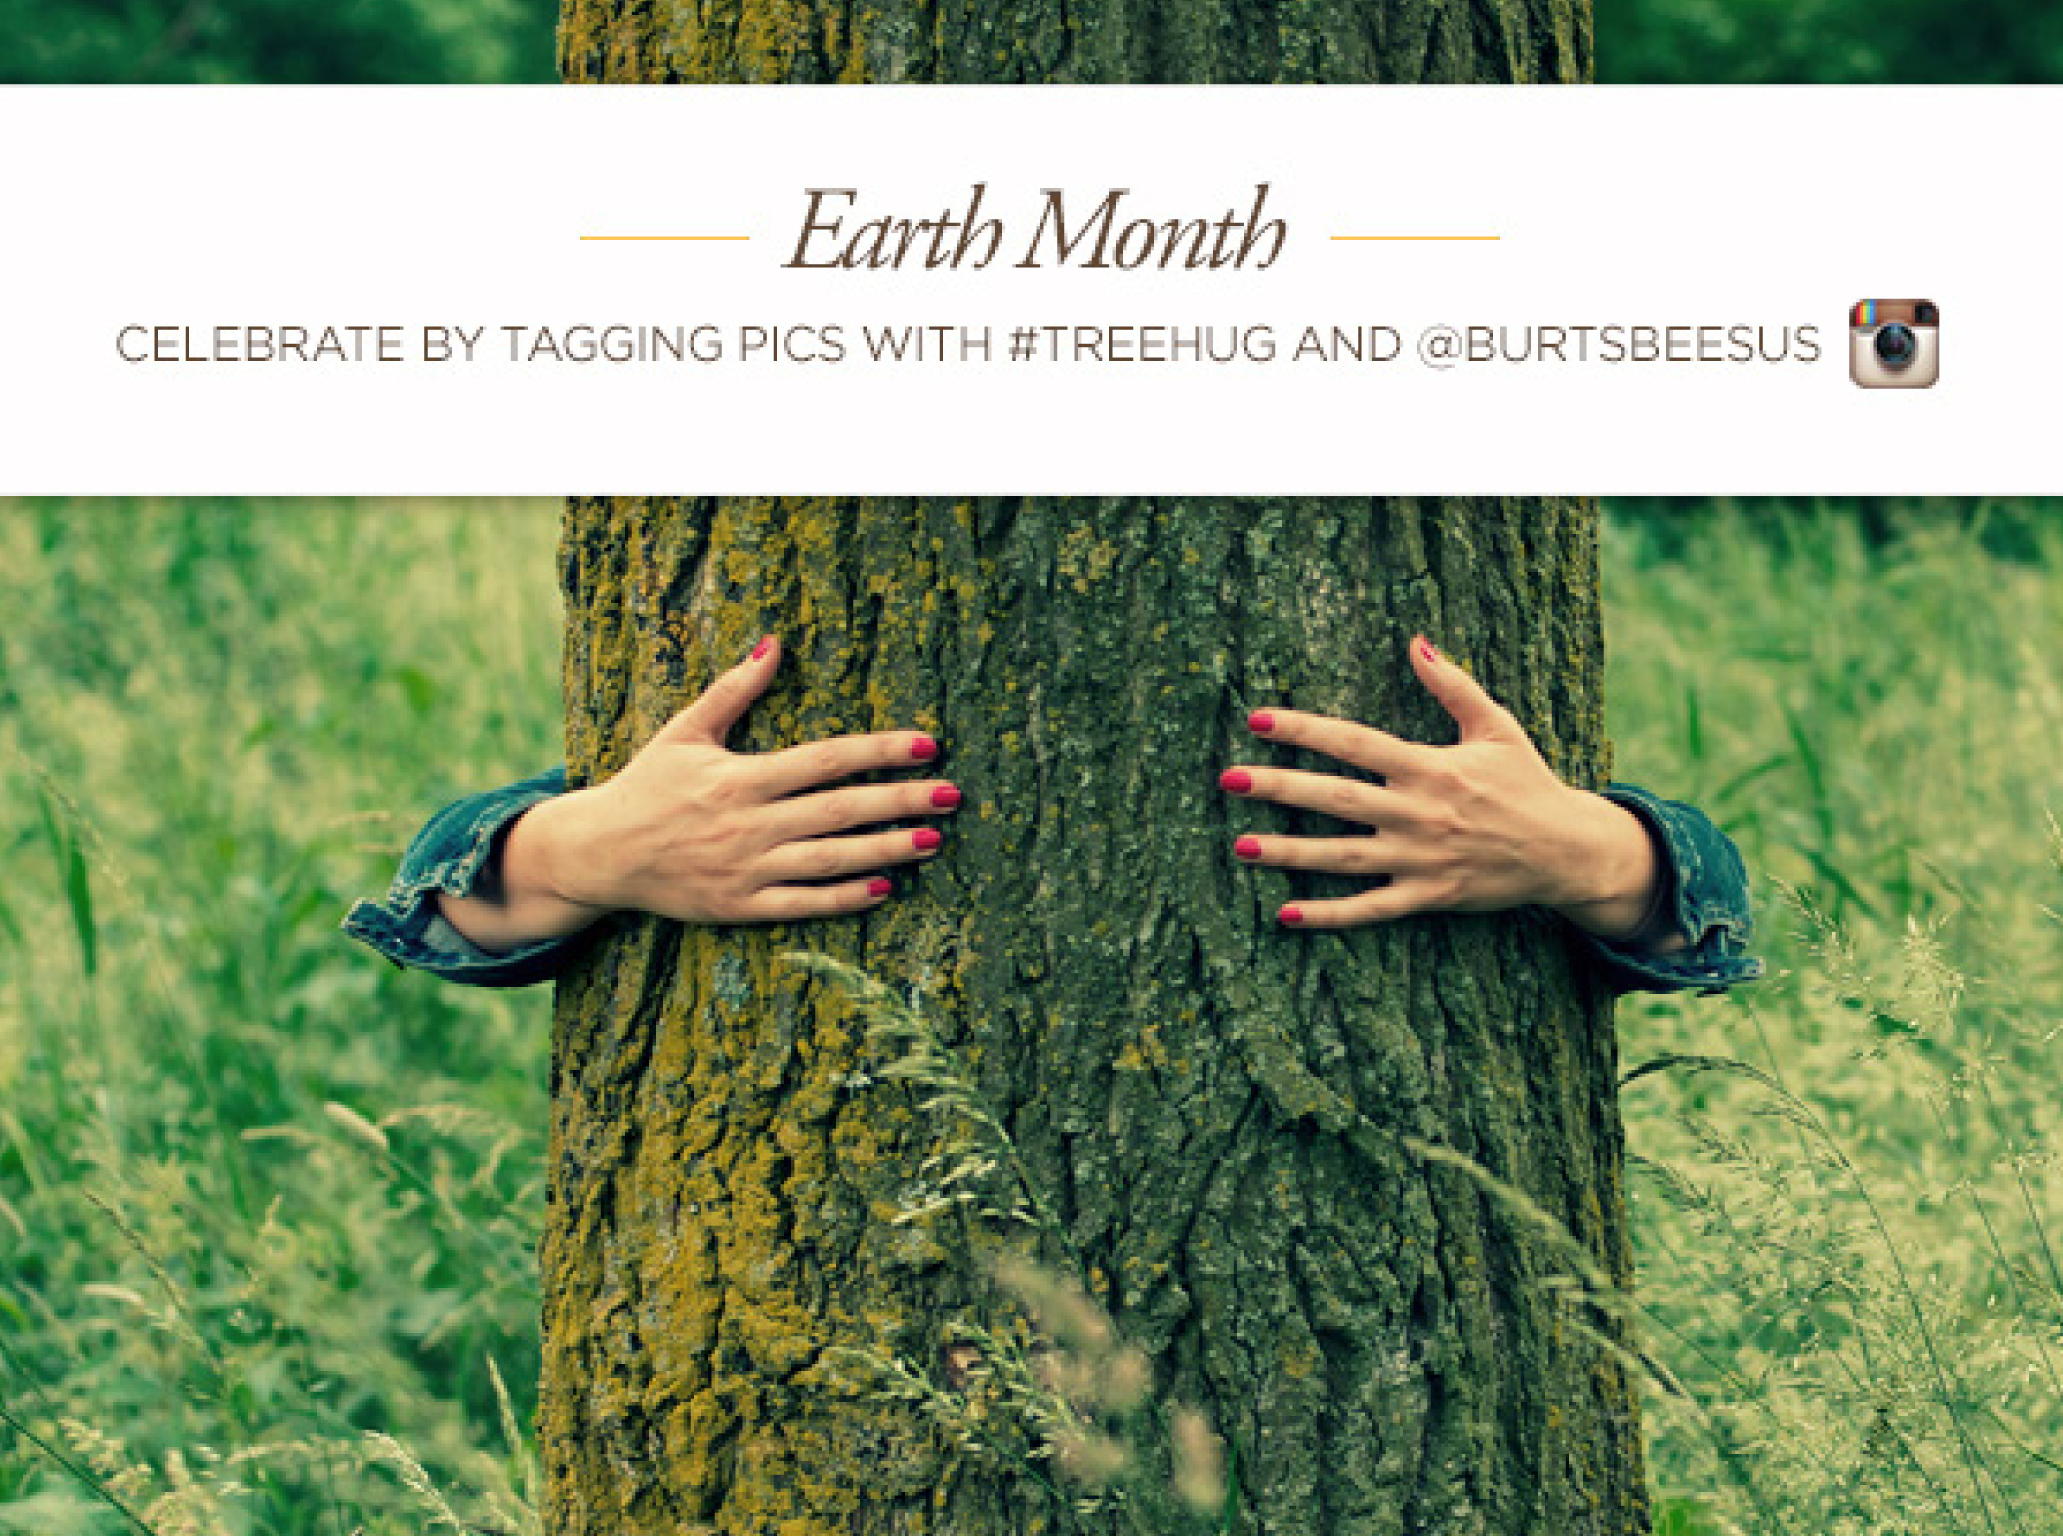  POST COPY: Not that you really need a reason to hug a tree, but here’s one anyway: One tree can absorb as much carbon in a year as a car produces while driving 26,000 miles. So for #earthmonth get outside and hug your closest tree, take a pic, and t